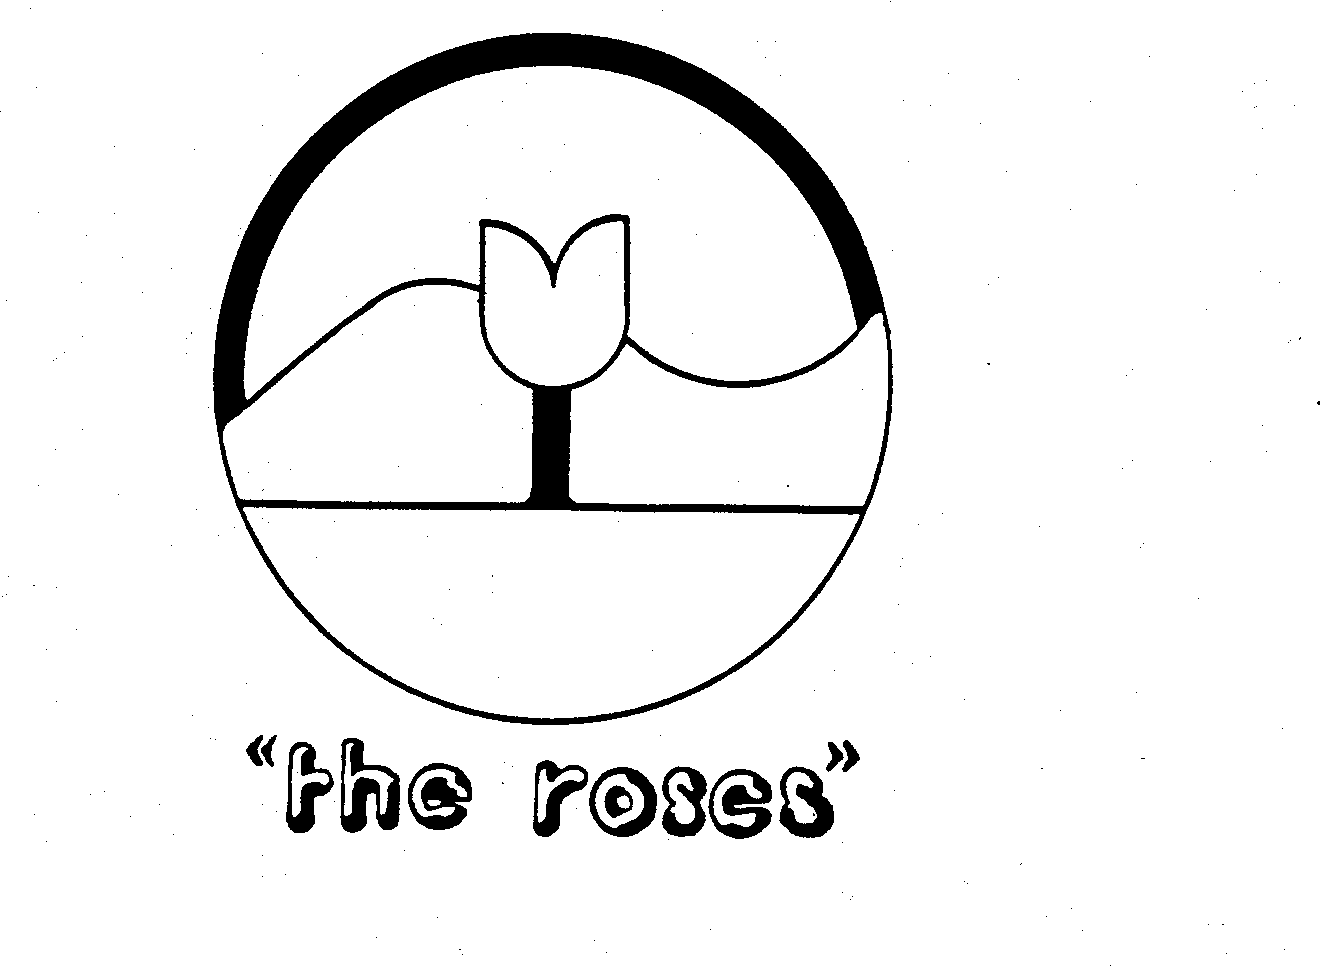  THE ROSES